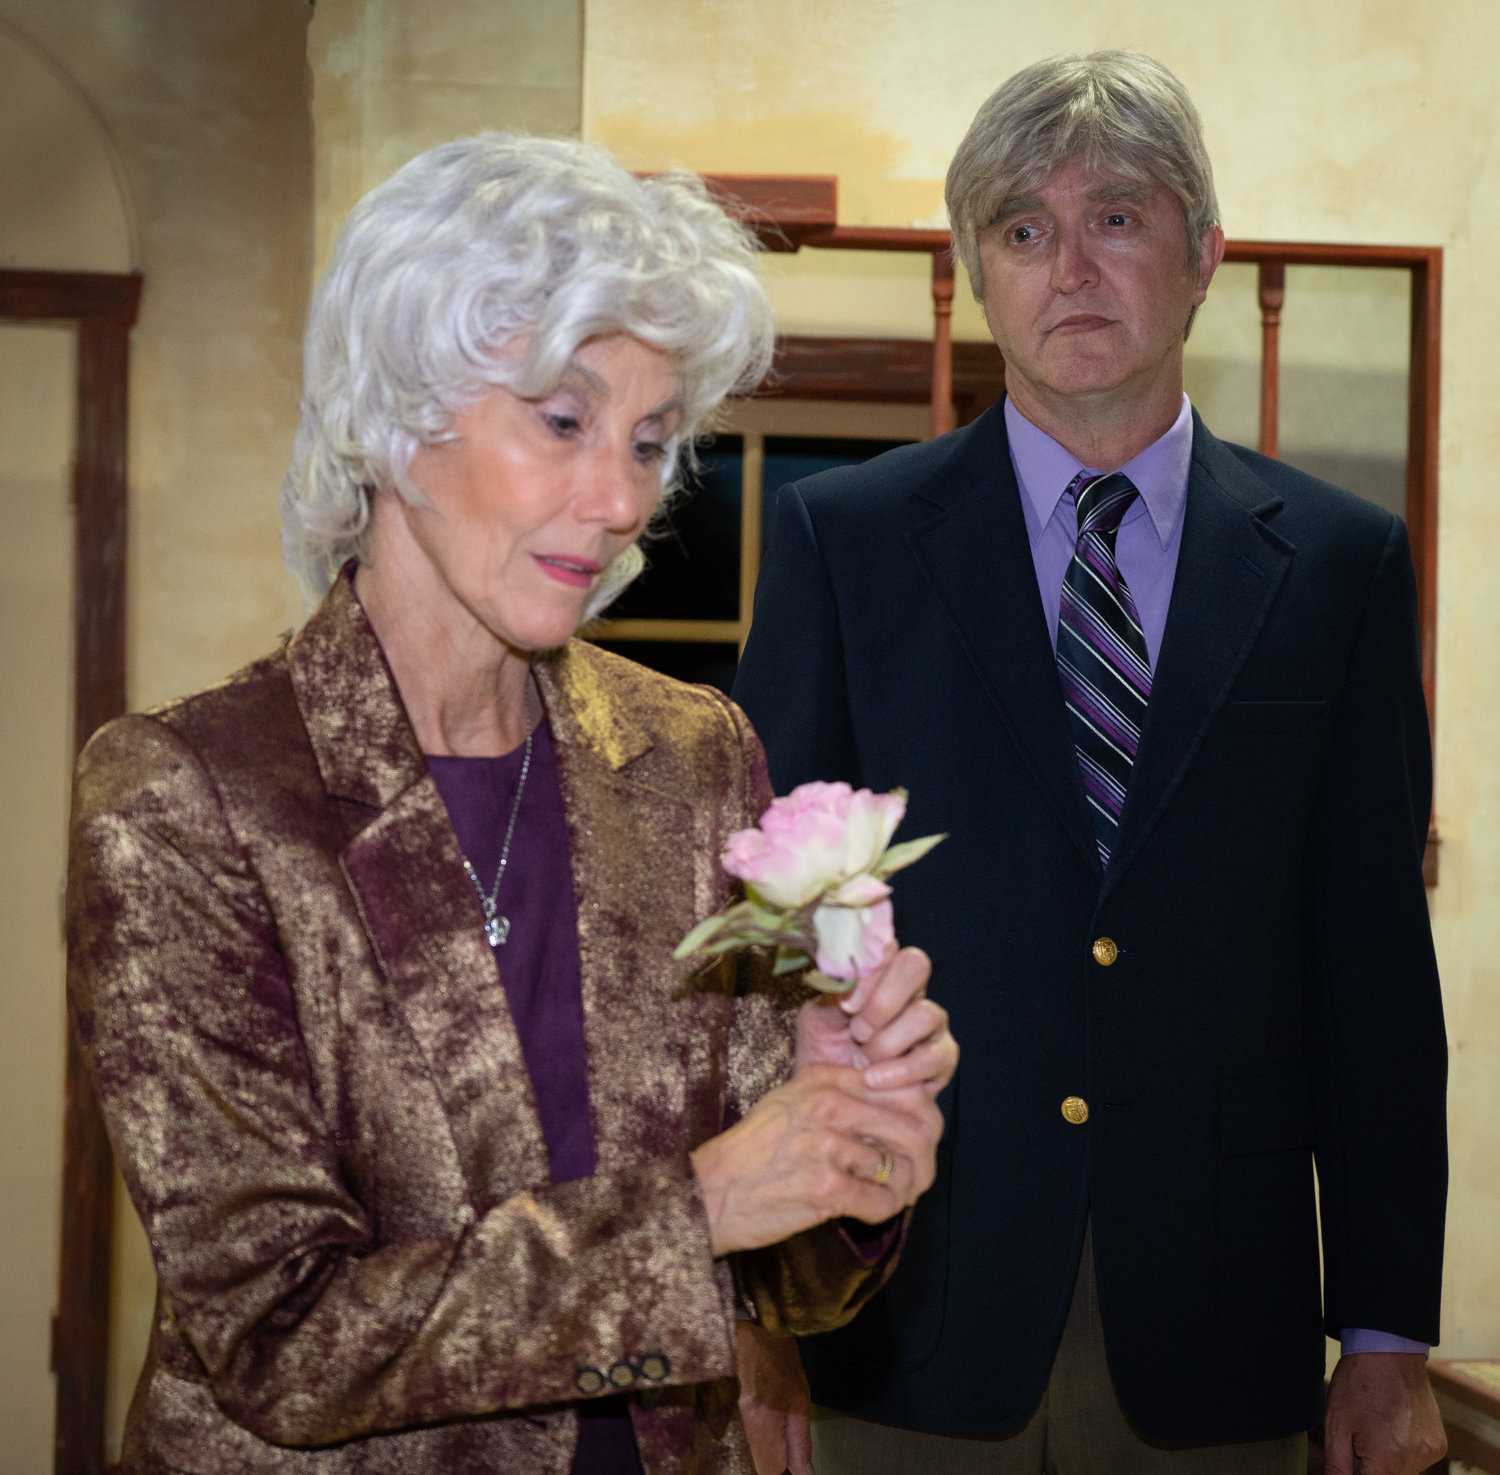 Alice Simms (Reba Hoffman, left) stares at a flower while Clark Simms (David Roberts, right) looks on from behind.